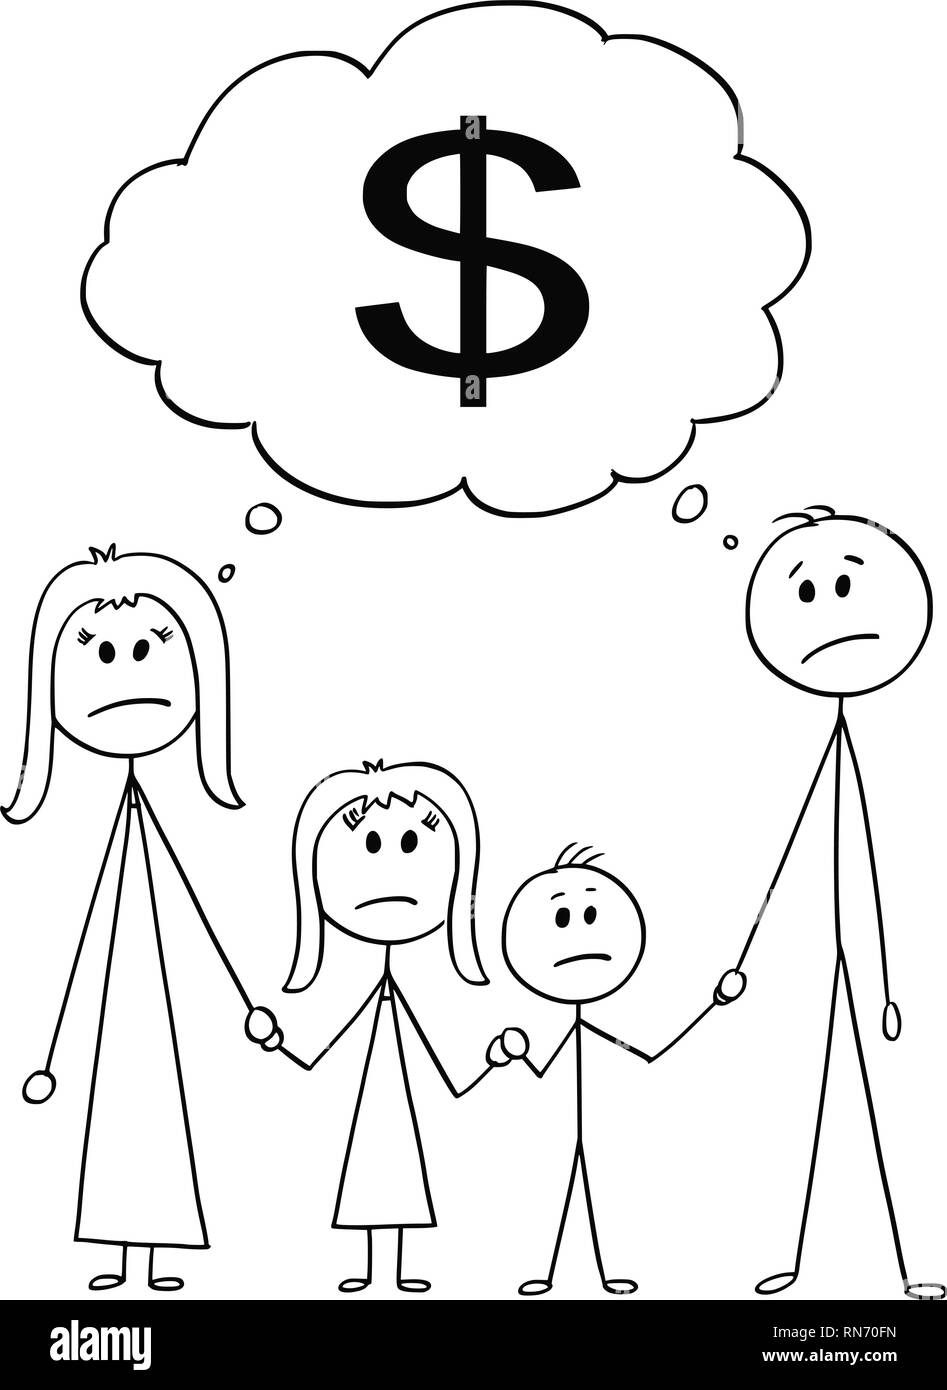 Cartoon of Unhappy Family, Couple of Man and Woman and Two Children With Dollar as Money Symbol Stock Vector